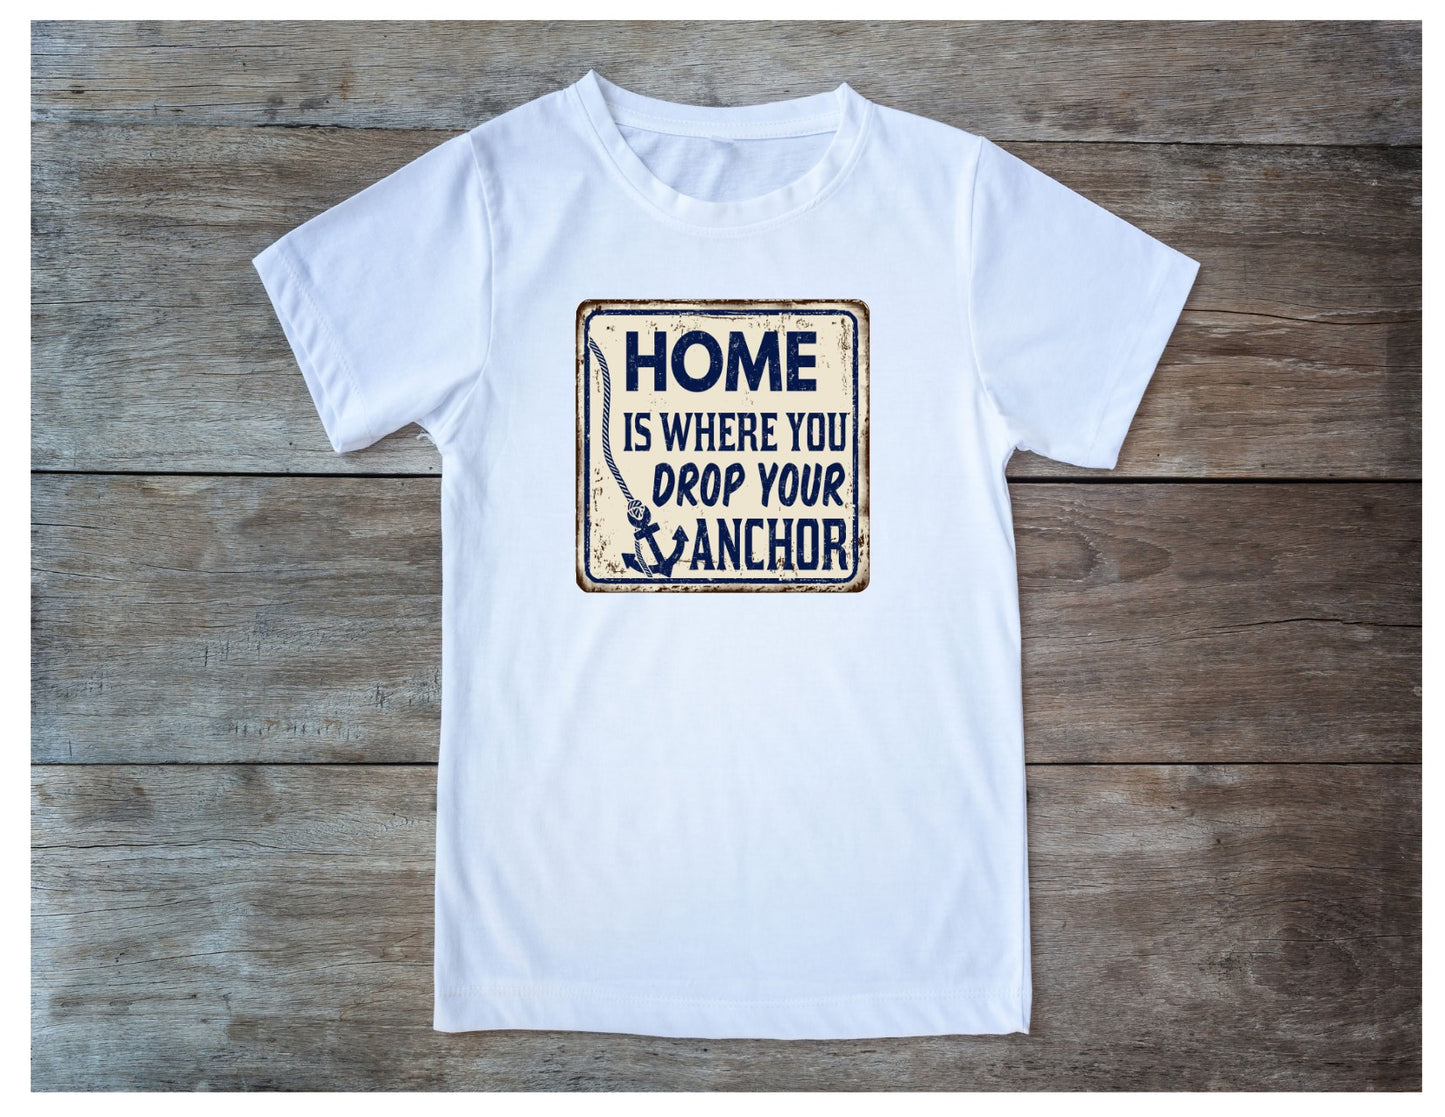 A Home is Where You Drop Your Anchor T-Shirt